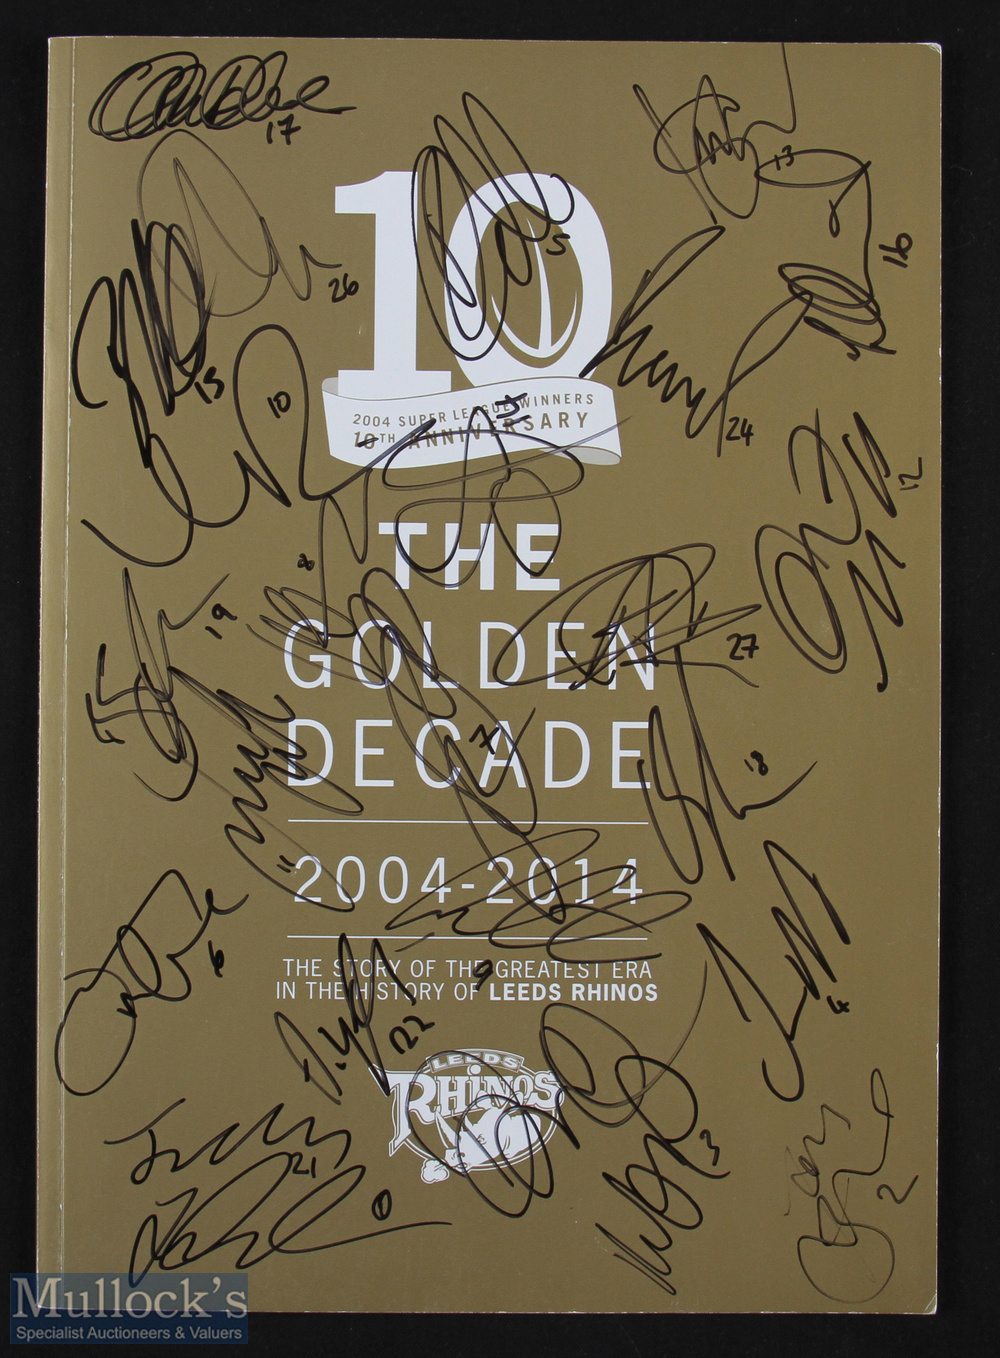 2004 Leeds Rhinos Super League Winners 10th Anniversary signed publication - in the original